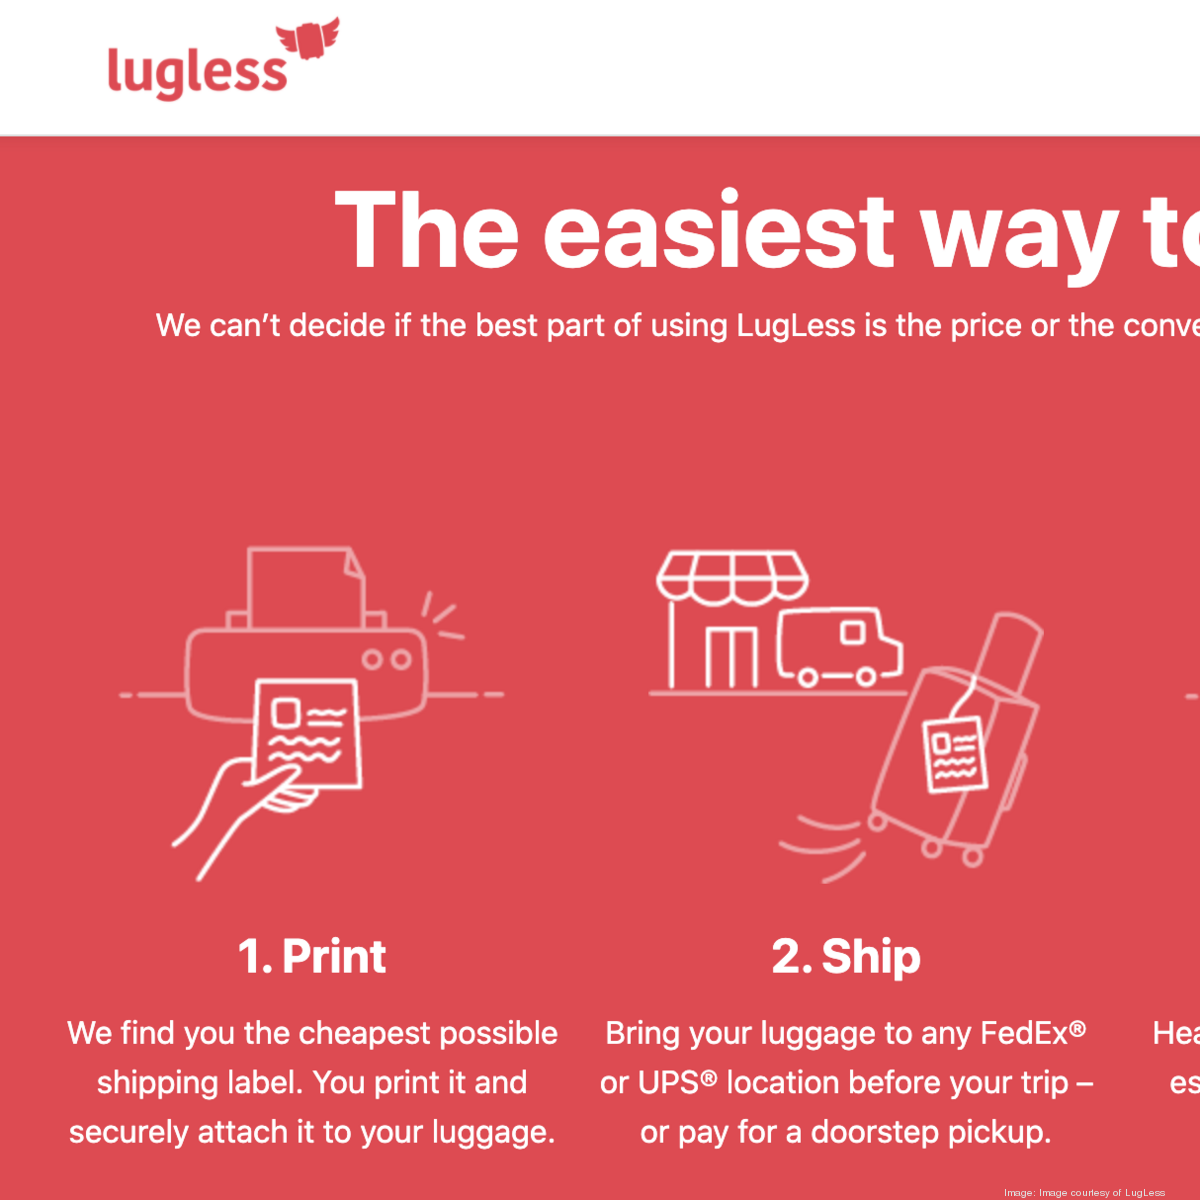 BostInno How travel startup LugLess has positioned itself as 'safety